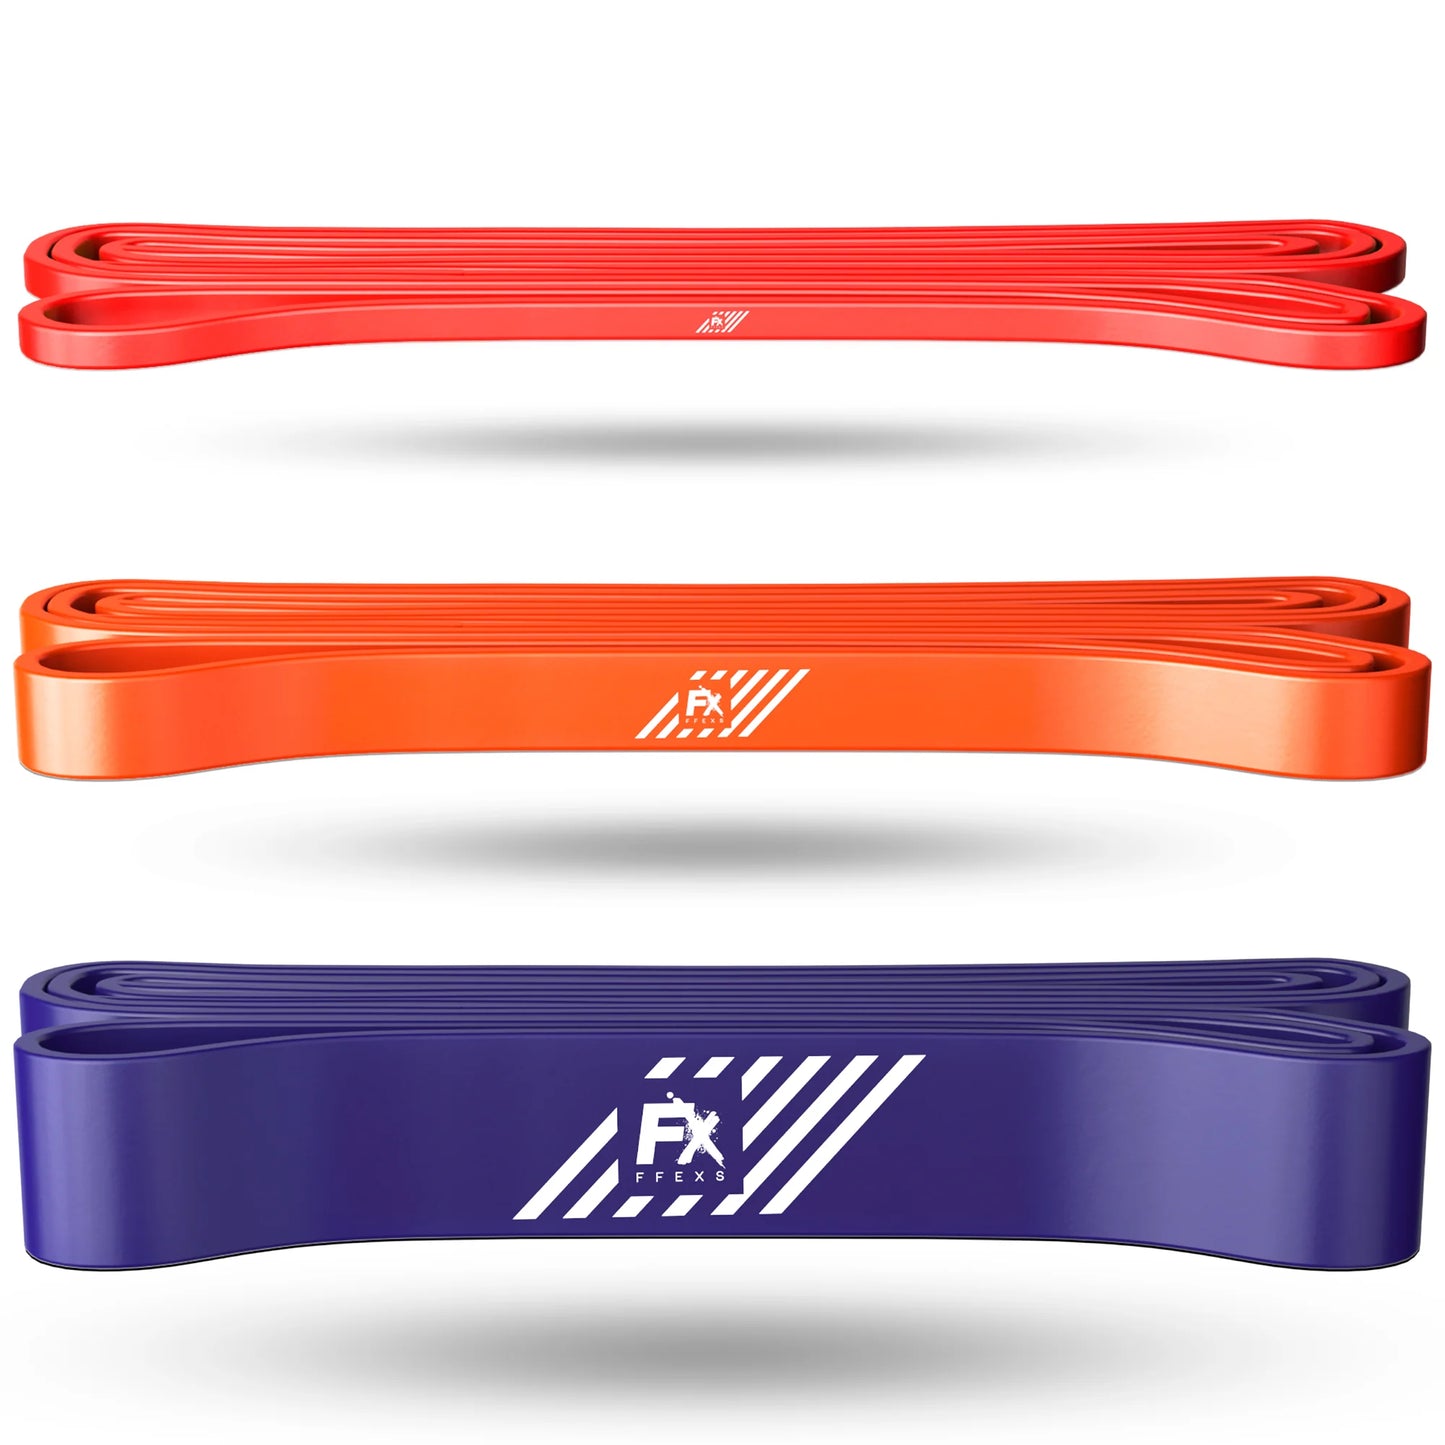 Pull Up Bands Set (3 pieces) - Improve your strength and flexibility